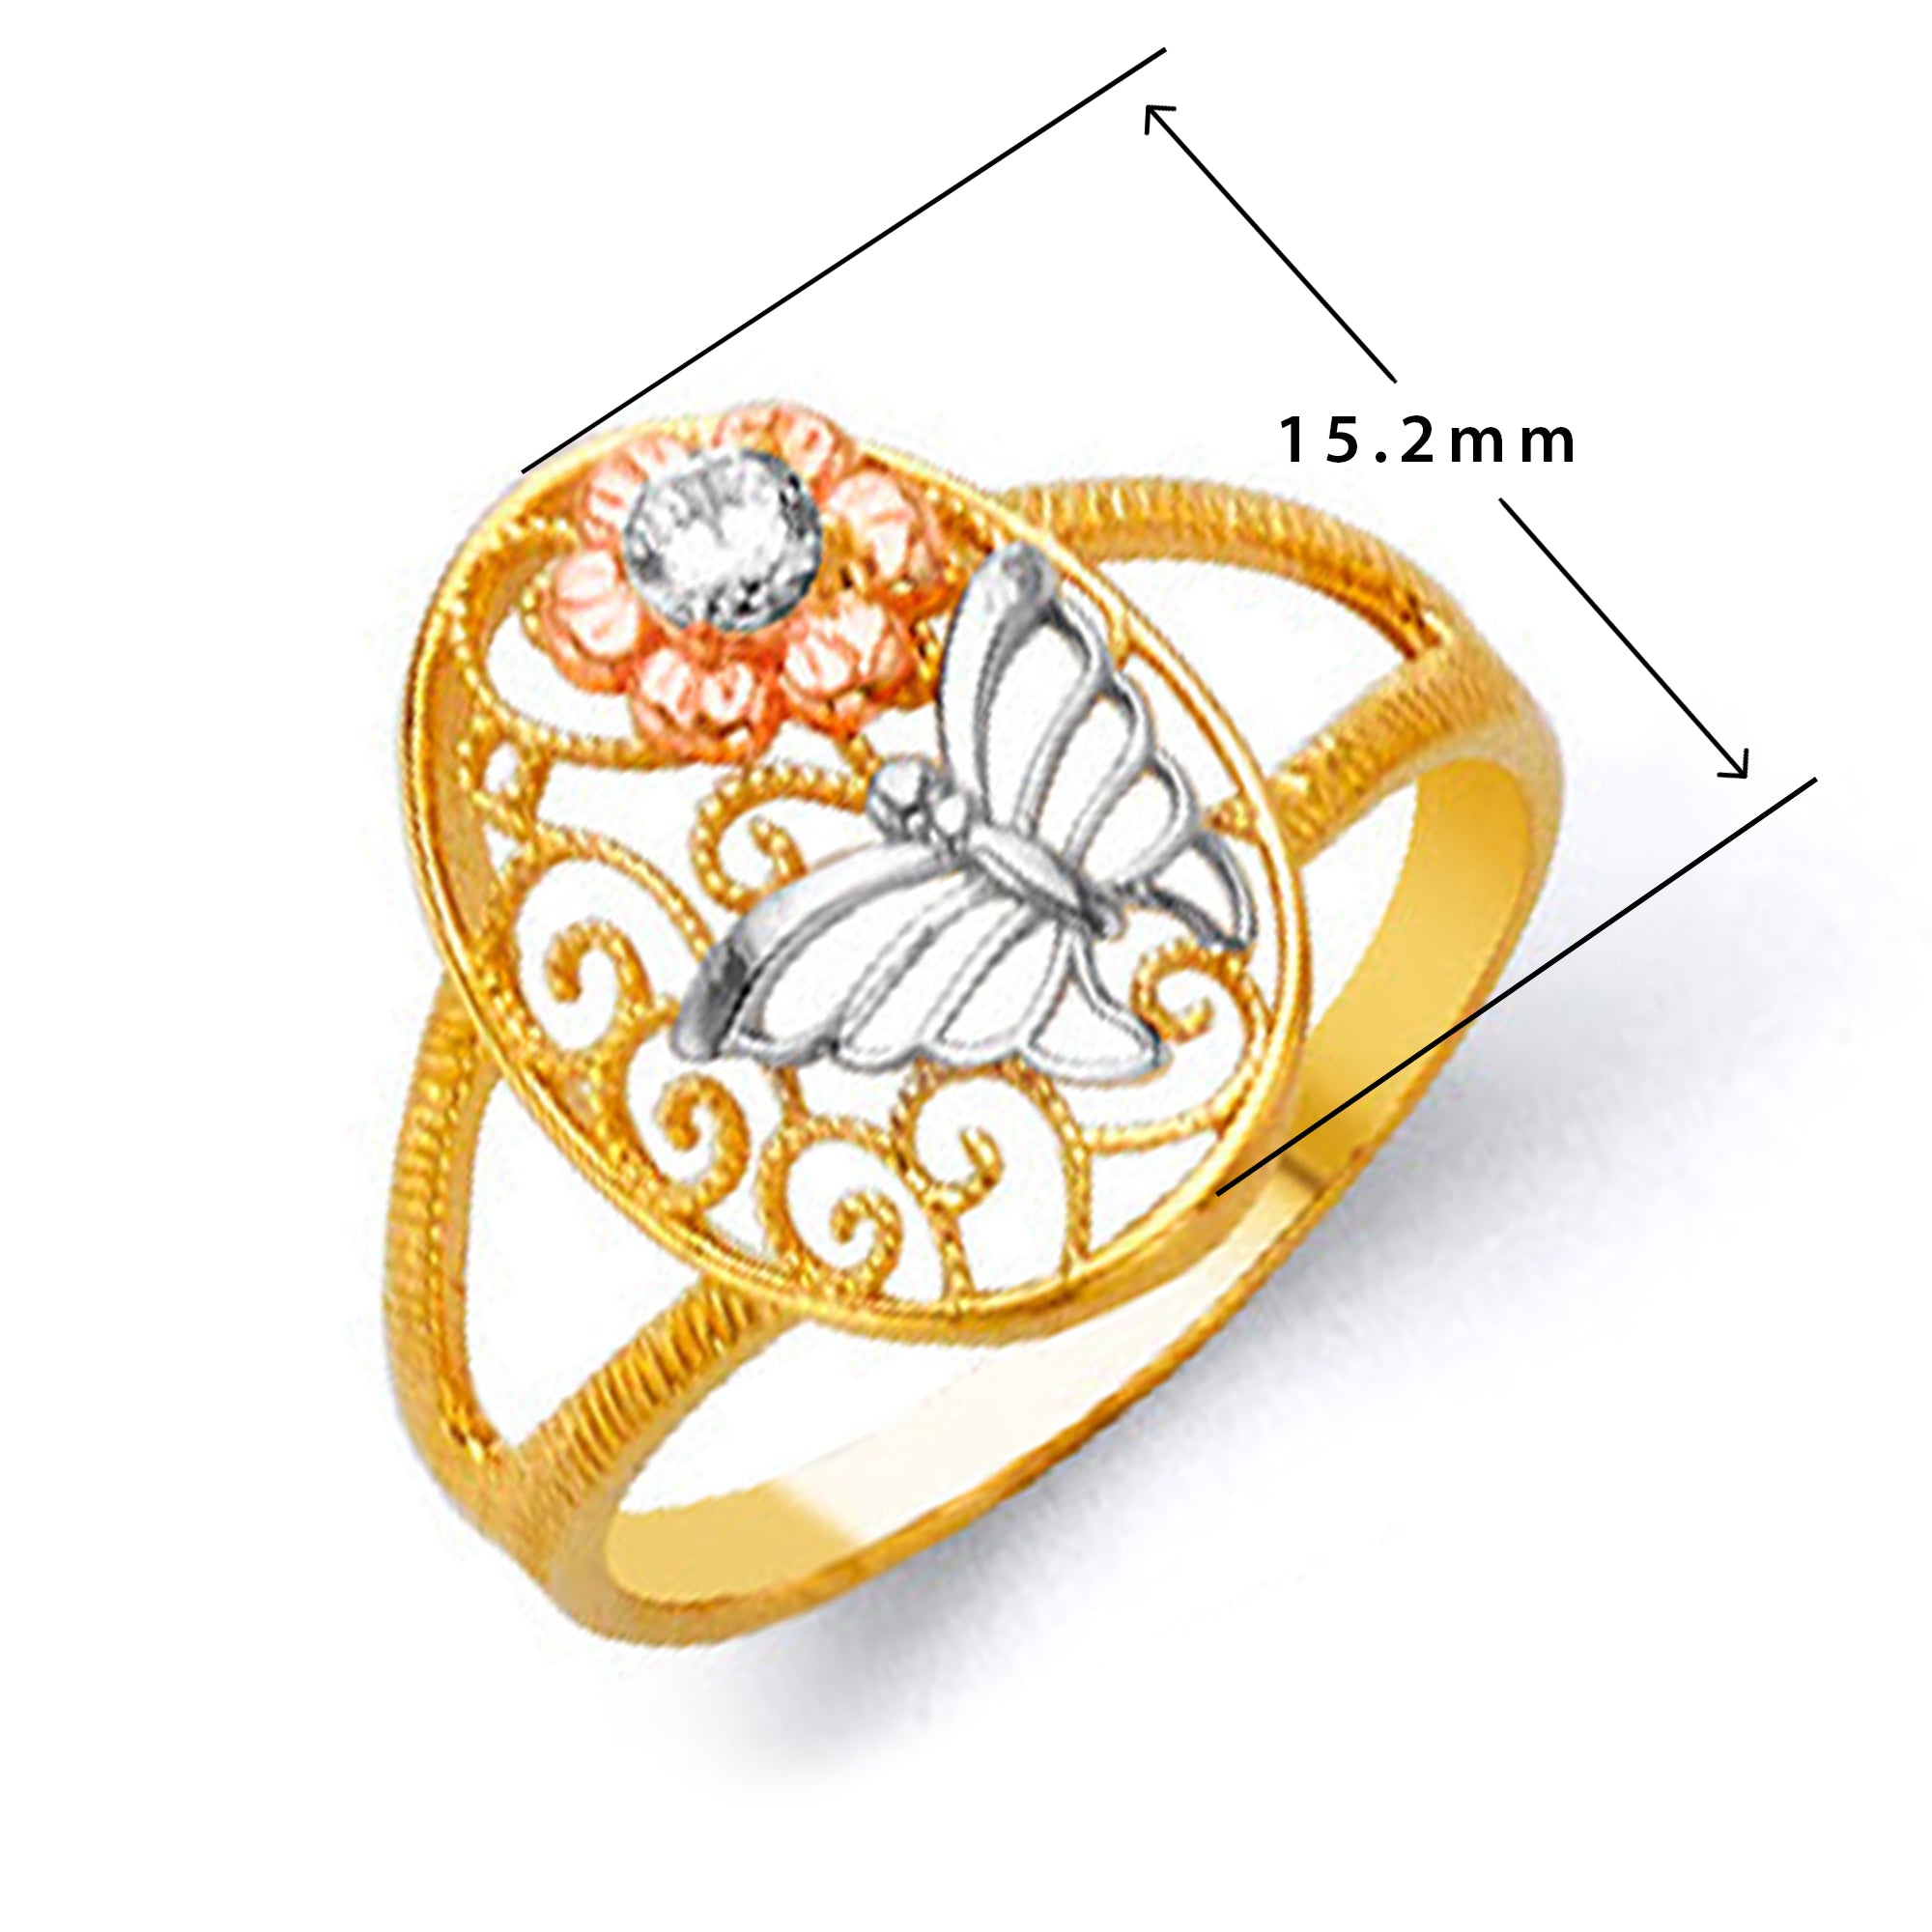 Reigning Tricolor Butterfly Ring in Solid Gold with Measurement